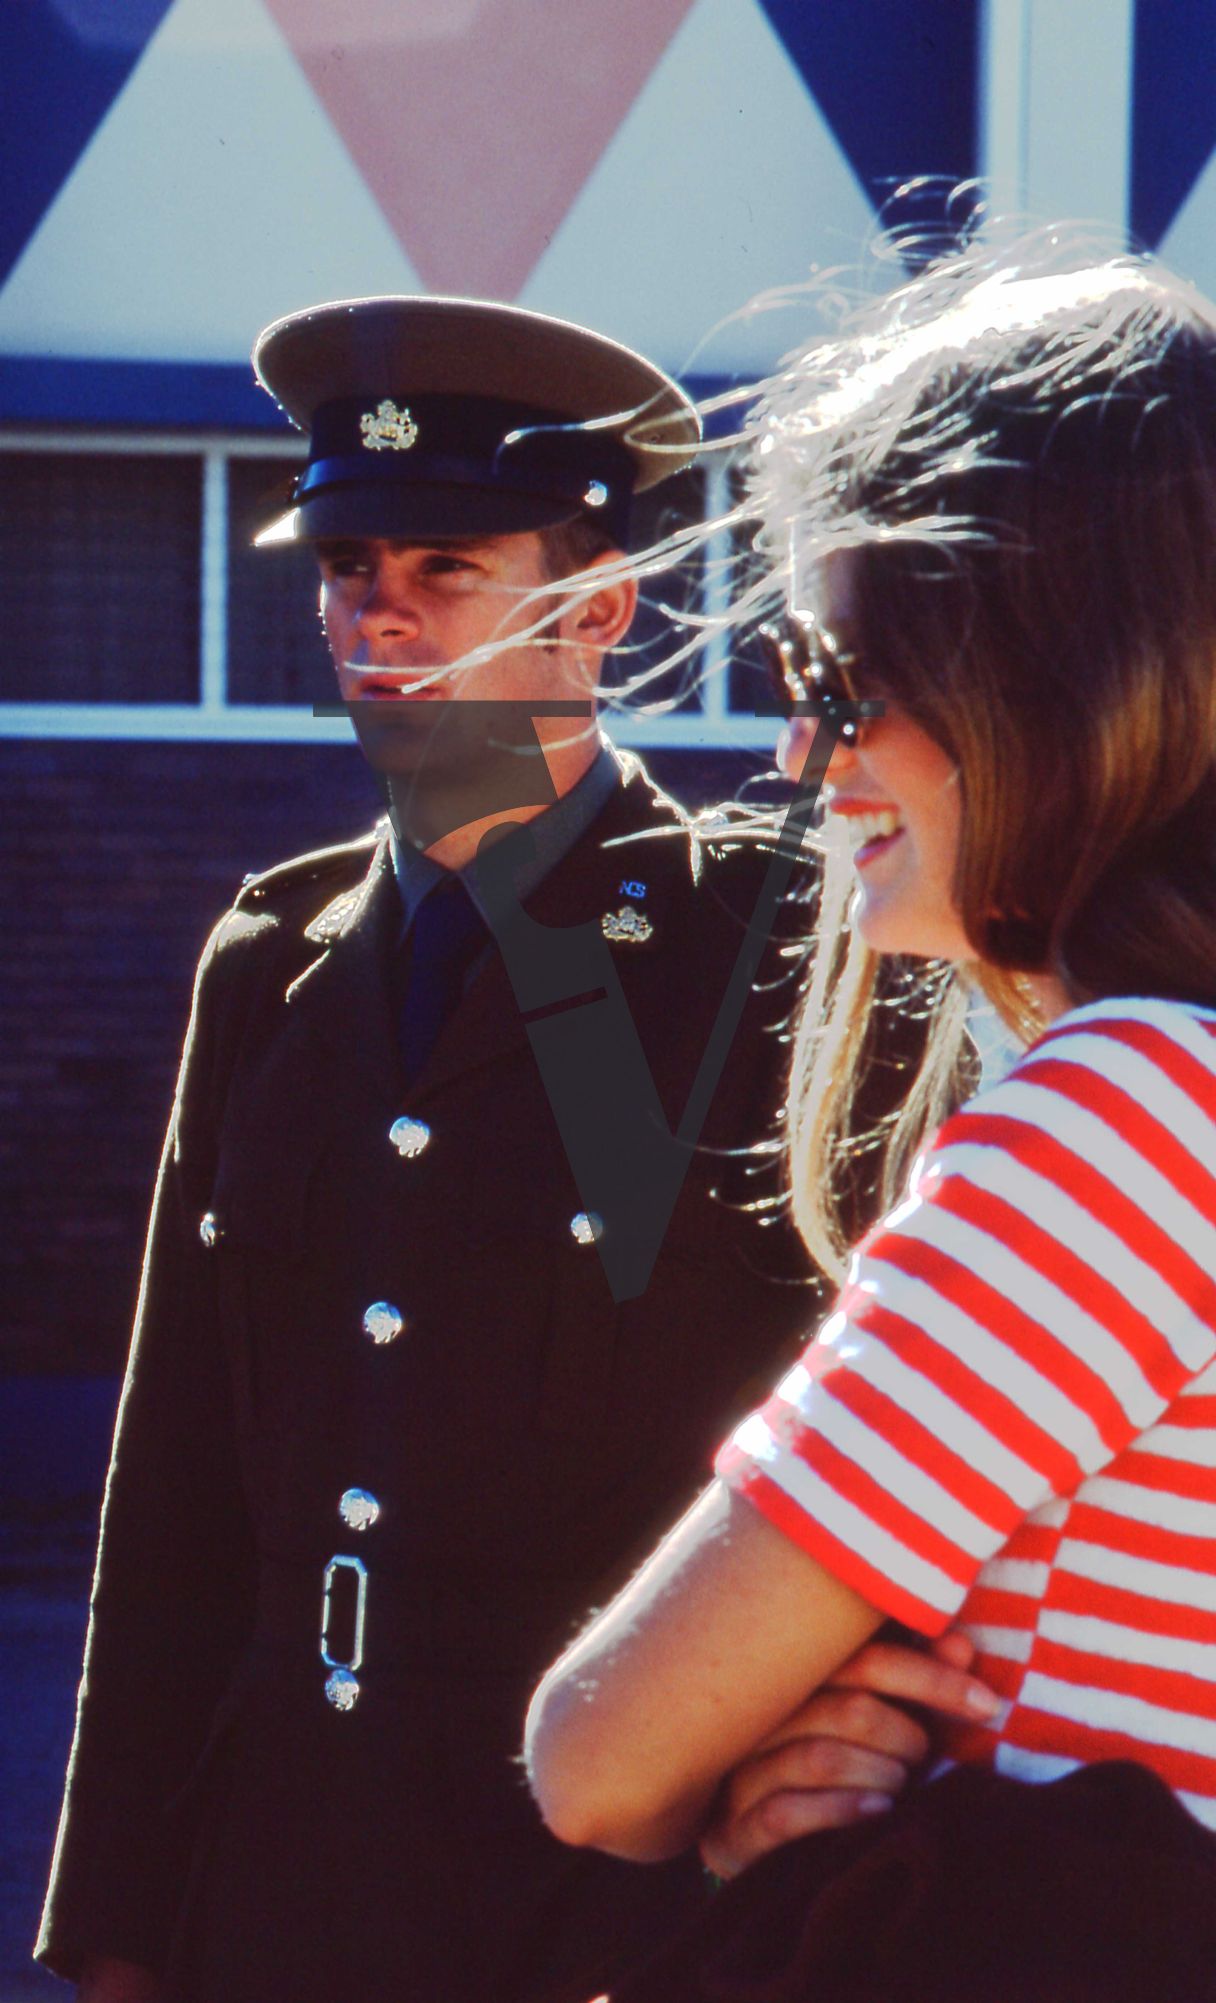 Rhodesia, Rhodesian Light Infantry passing out ceremony, British South Africa Policeman (BSAP), woman, candid, mid-shot.